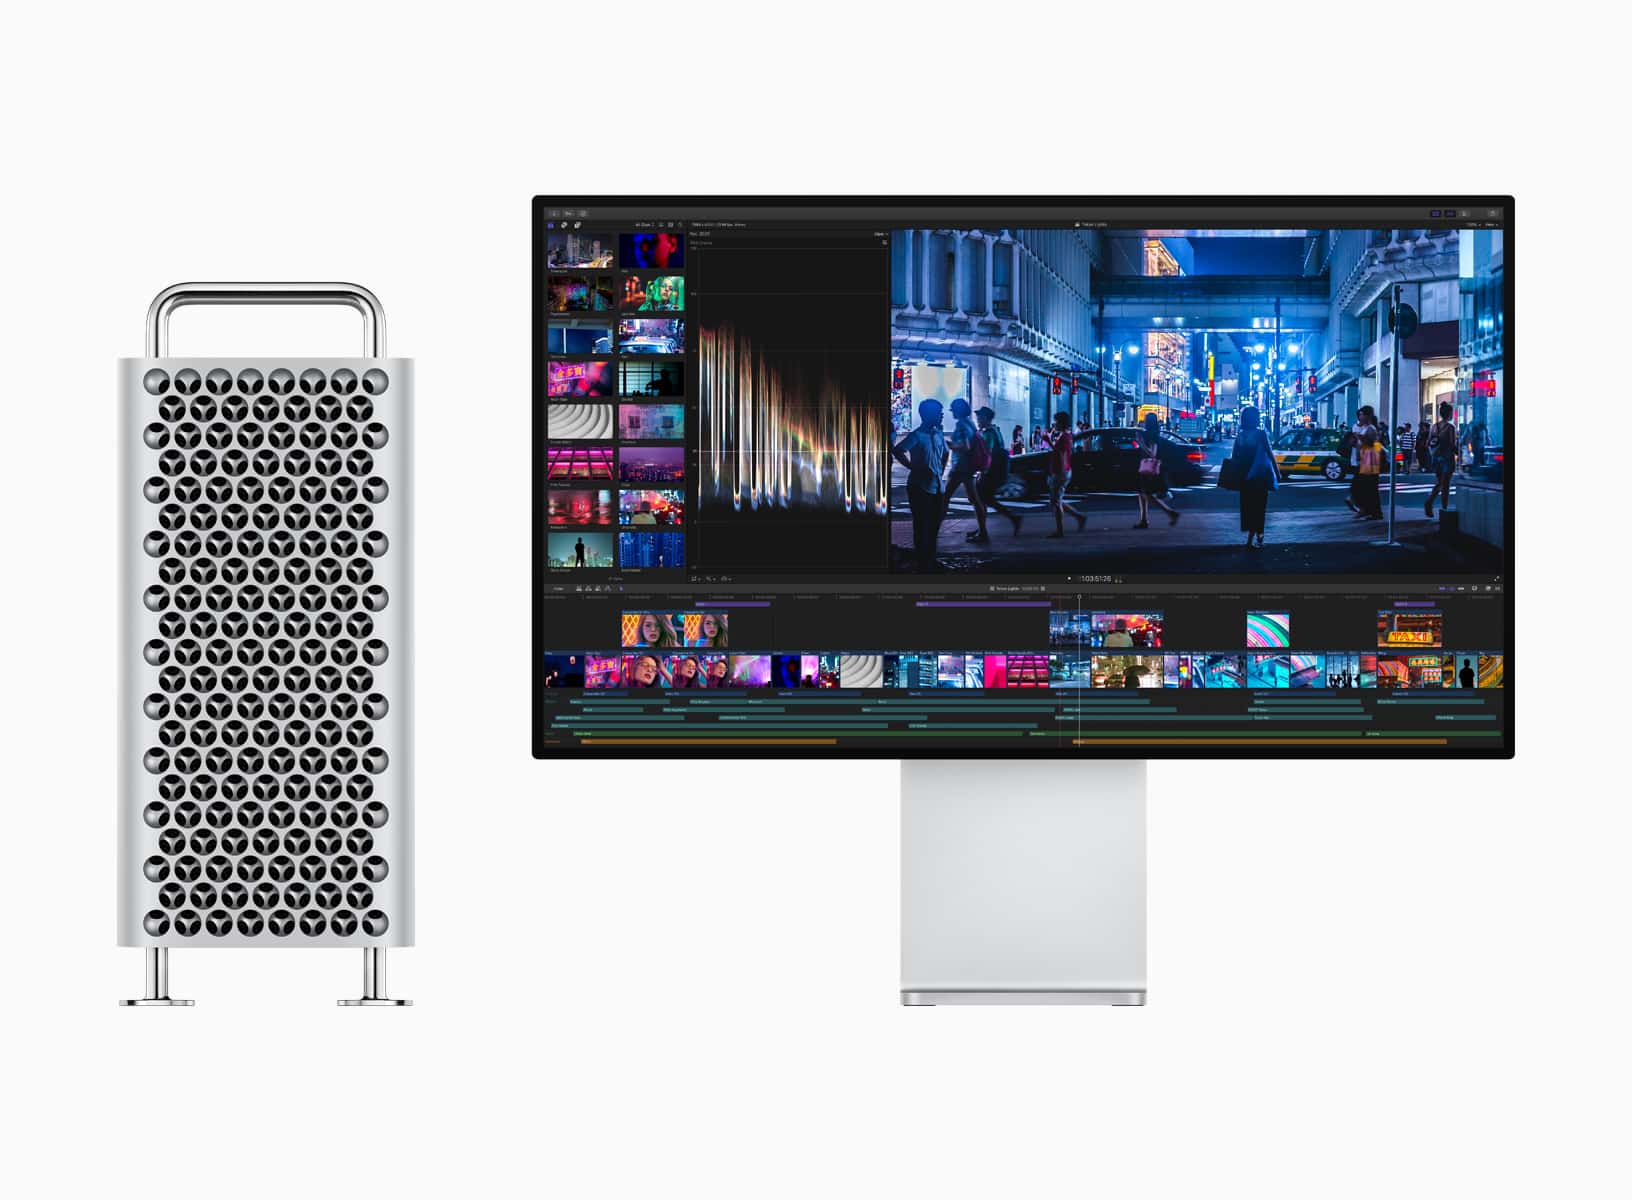 Apple introduces the all-new Mac Pro and Pro Display XDR